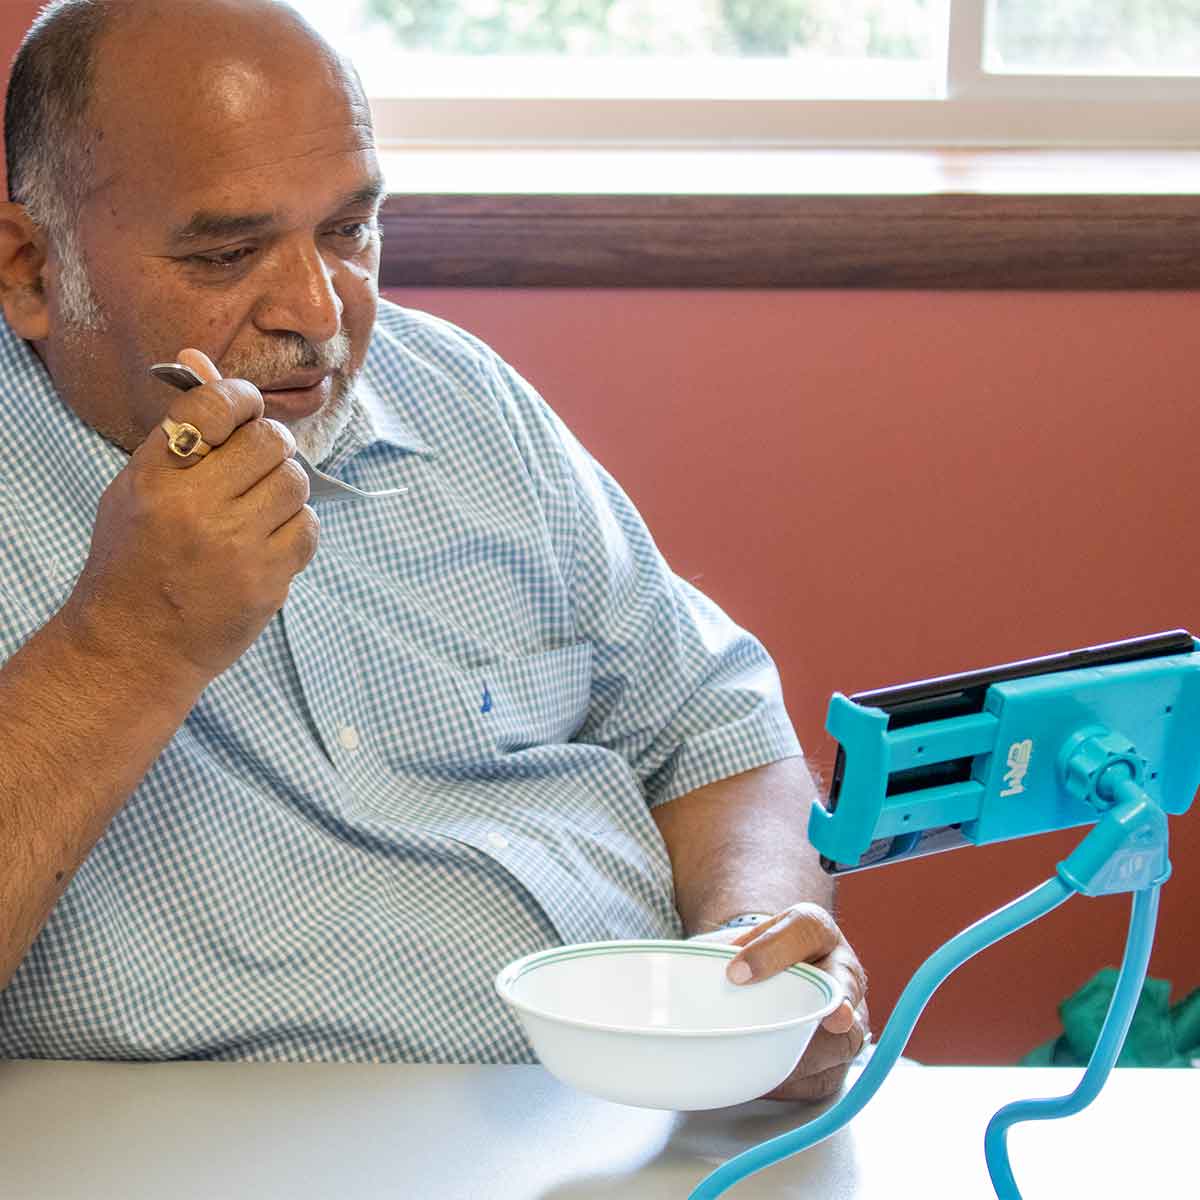 A man using Phone holder while eating food 